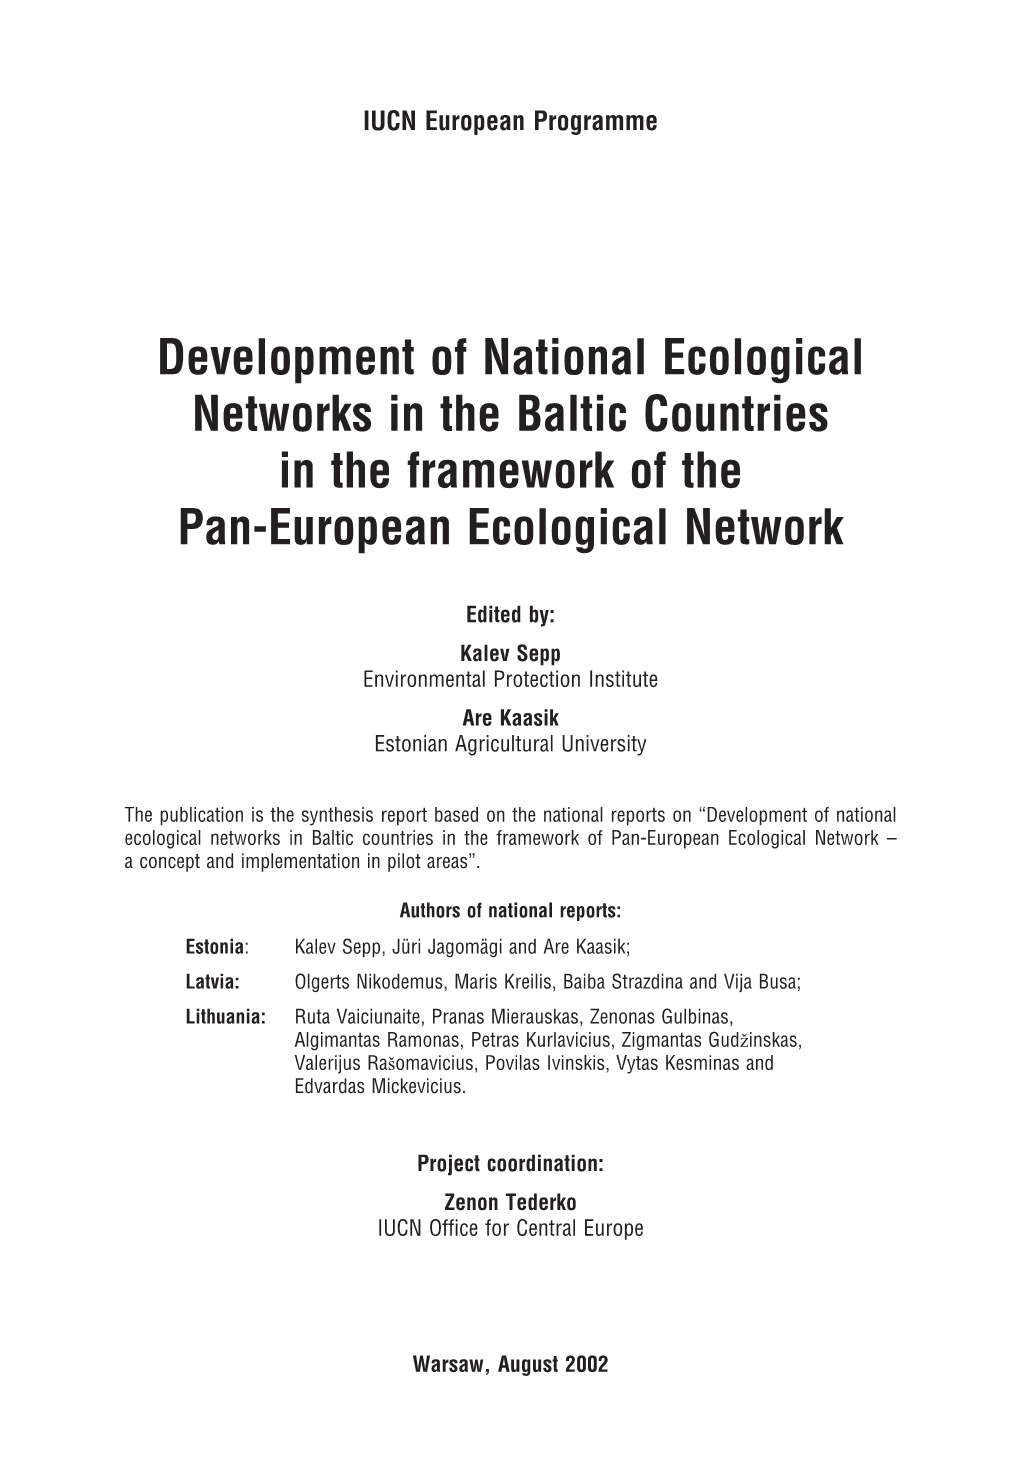 Development of National Ecological Networks in the Baltic Countries in the Framework of the Pan-European Ecological Network